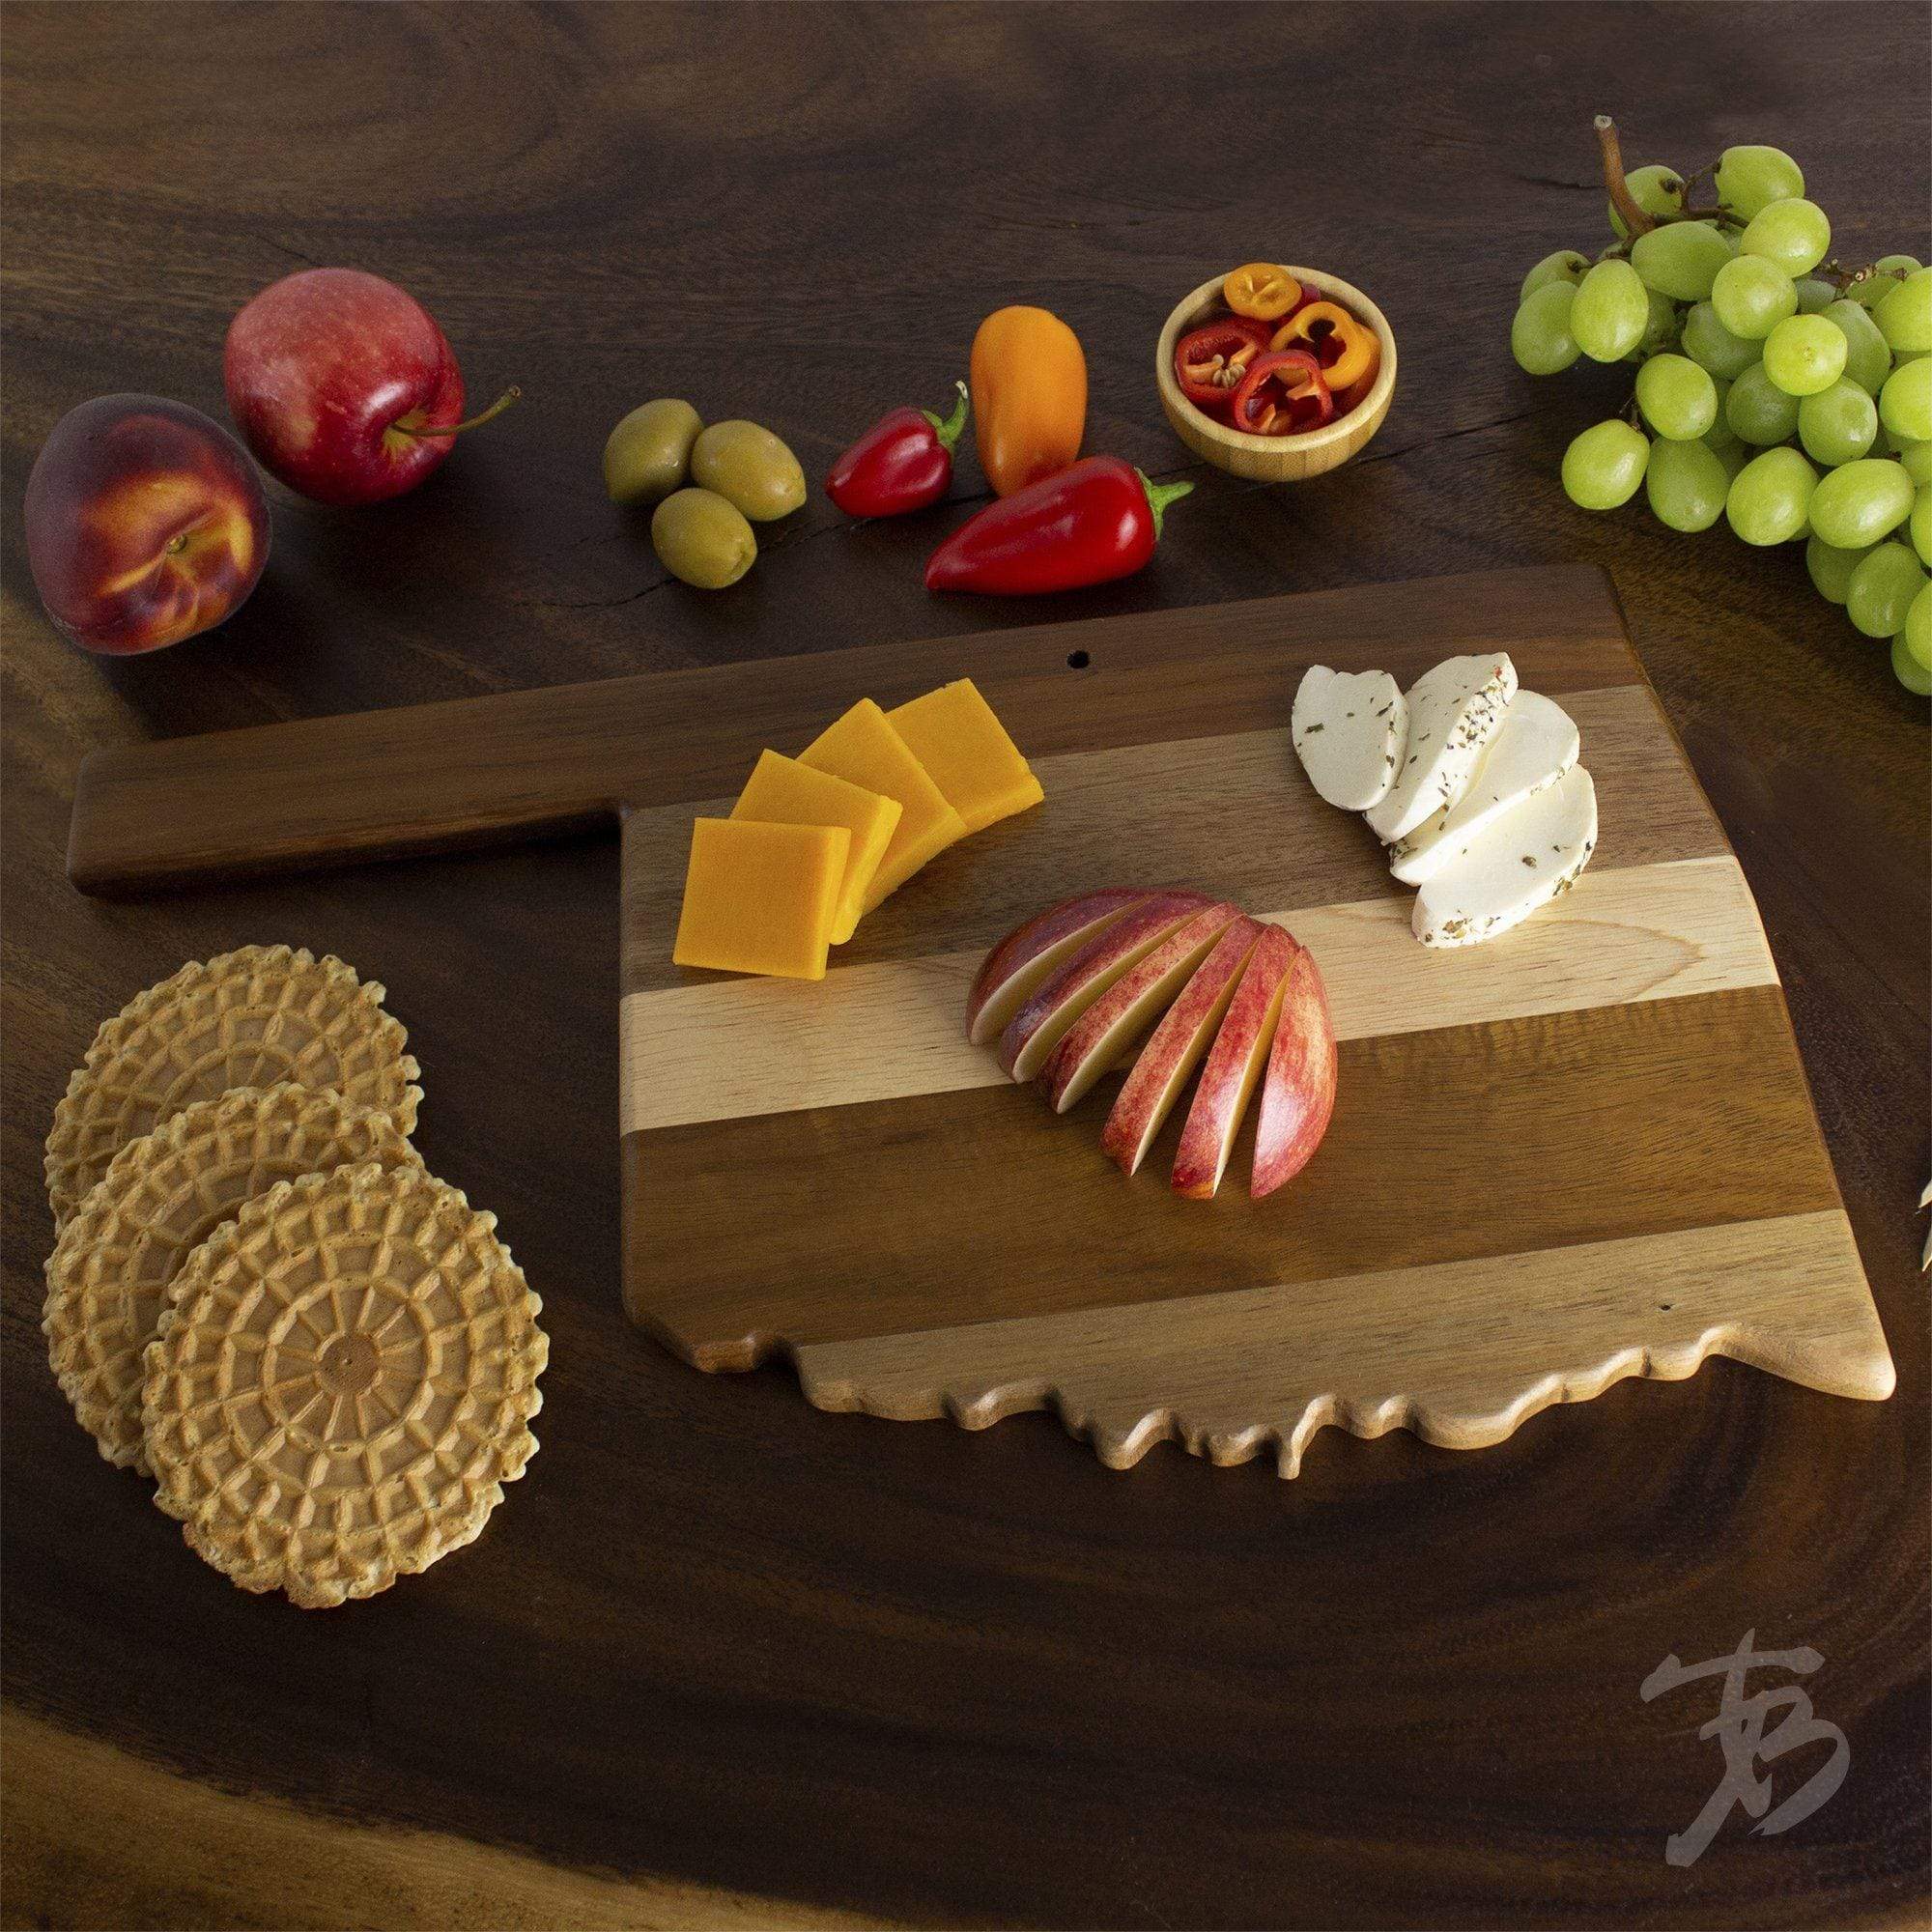 Totally Bamboo Rock & Branch® Shiplap Series Oklahoma State Shaped Wood Serving and Cutting Board